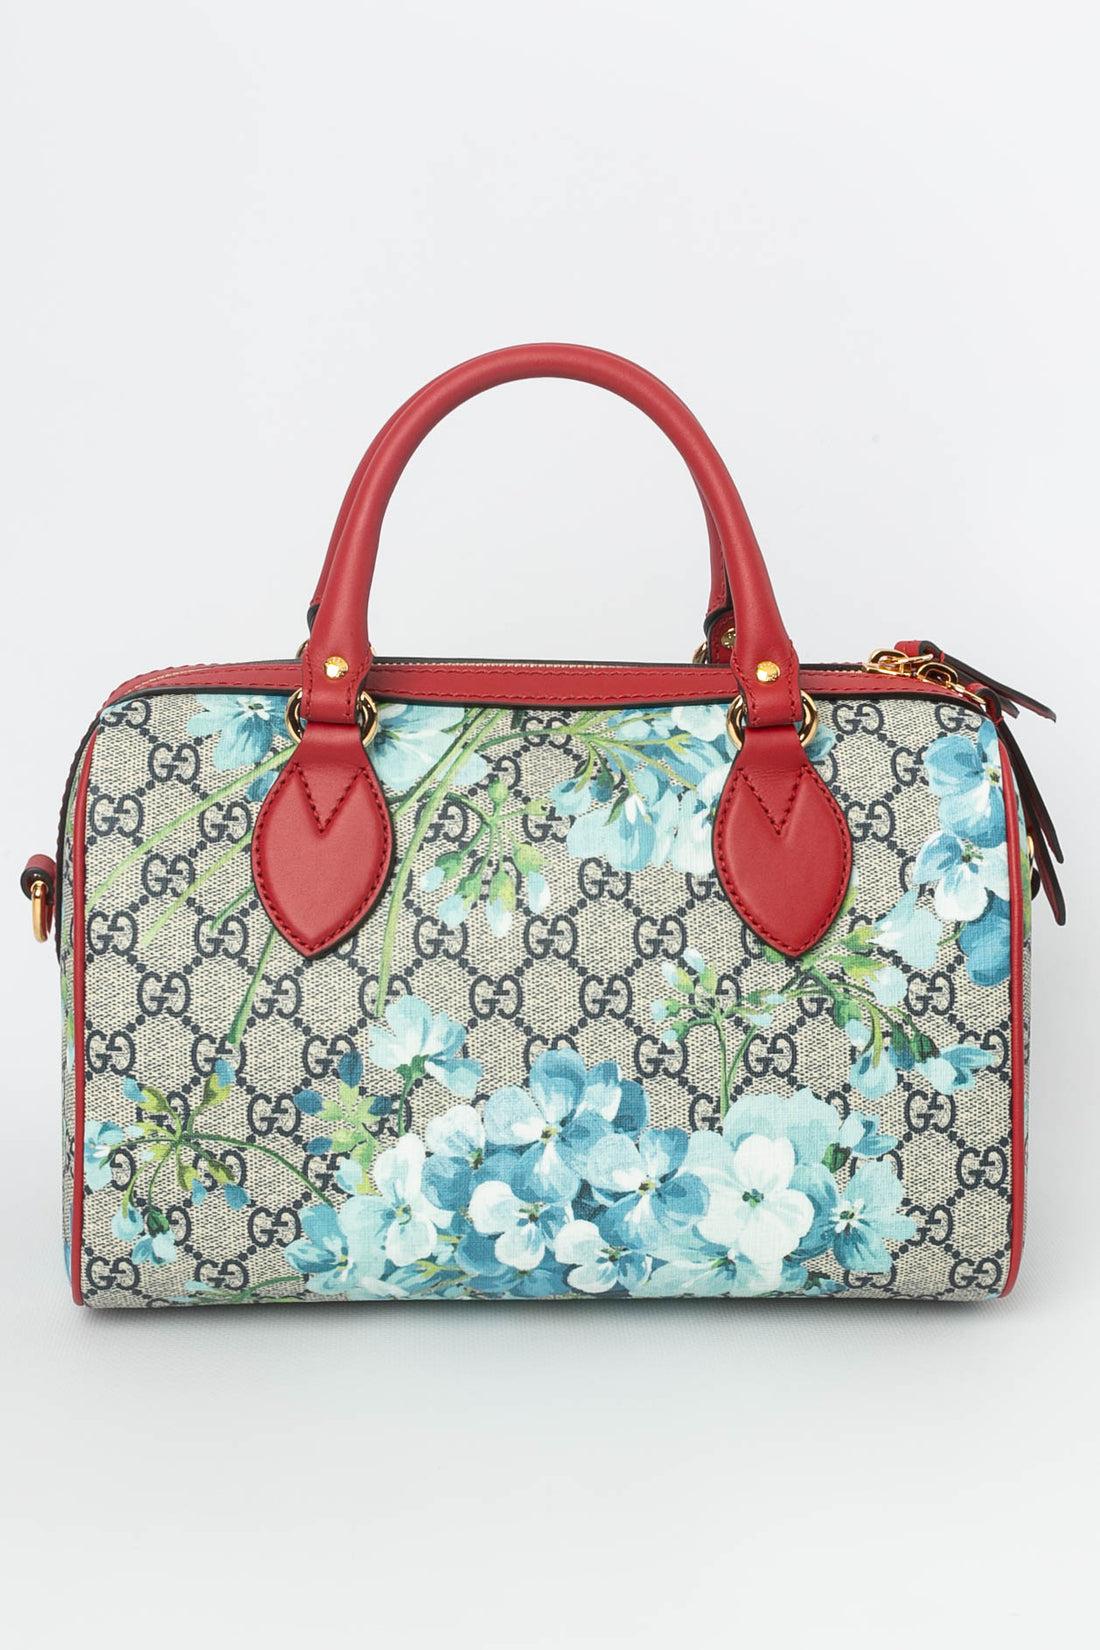 Gucci (Made in Italy) Shoulder bag in monogrammed canvas printed with floral pattern. Red leather and gilded metal hardware. The inside, lined with suede, features a zipped pocket and two patch pockets.

Additional information: 

Dimensions: 
Width: